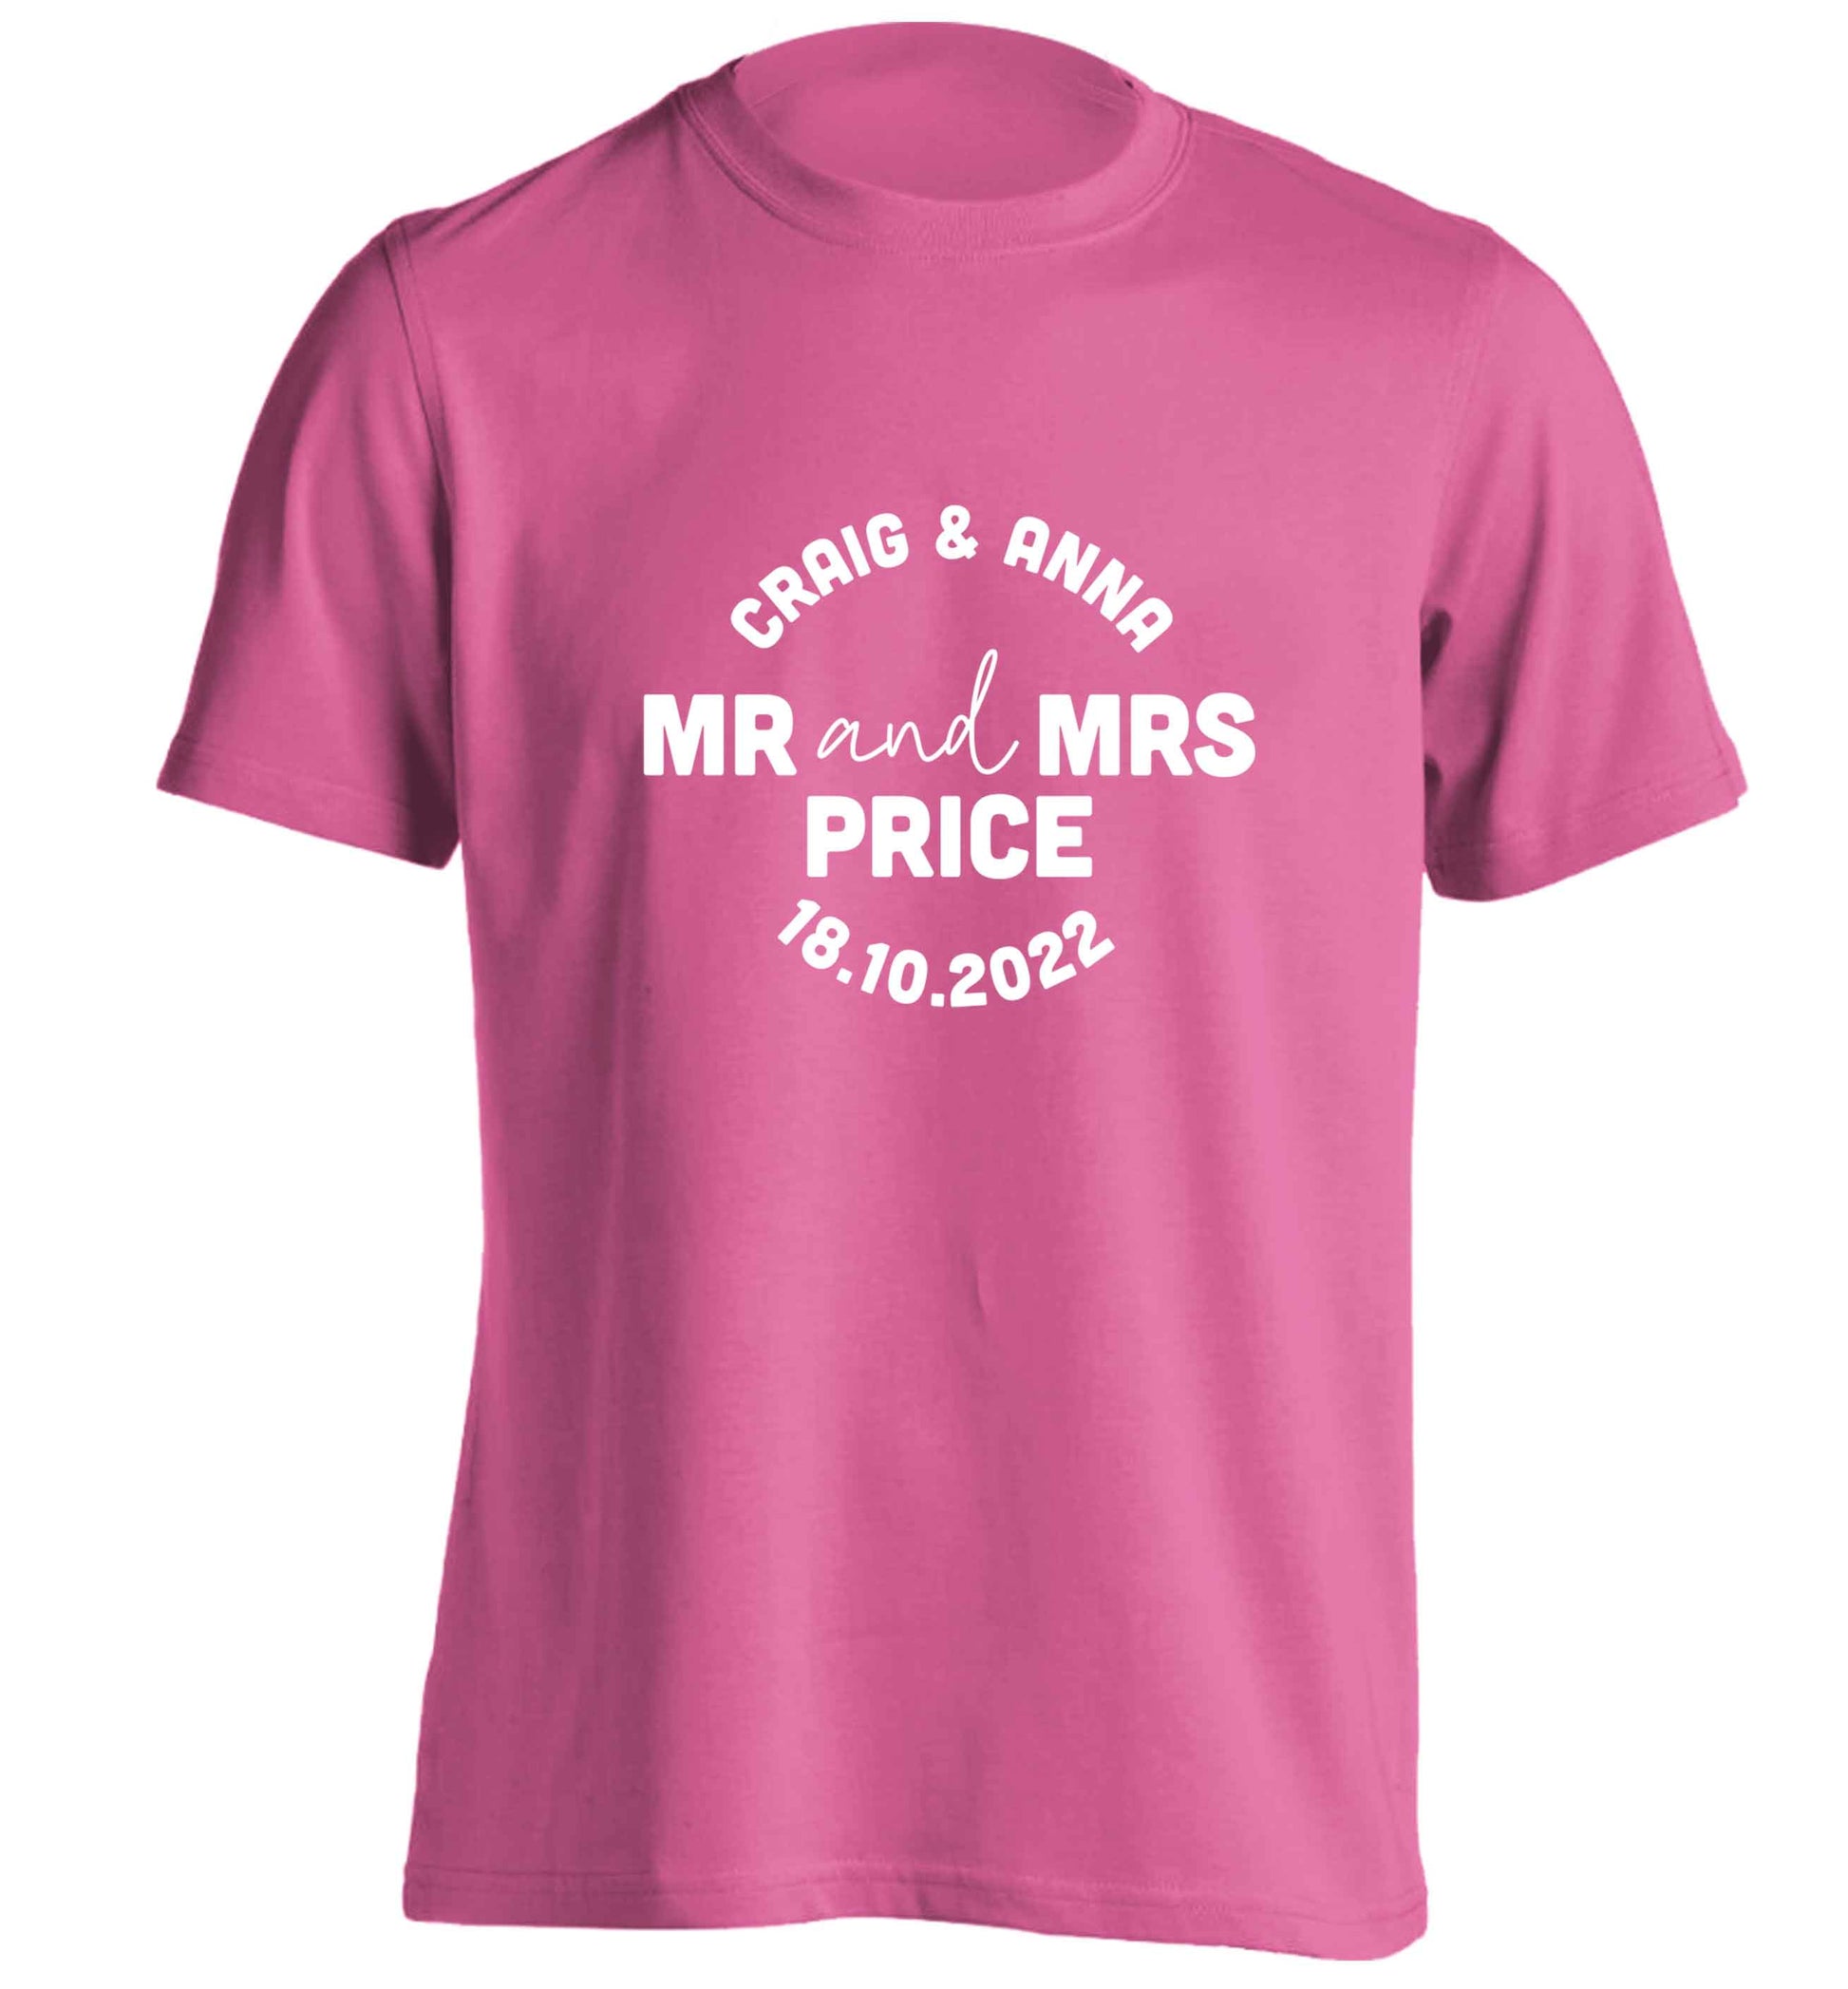 Personalised Mr and Mrs wedding and date! Ideal wedding favours! adults unisex pink Tshirt 2XL